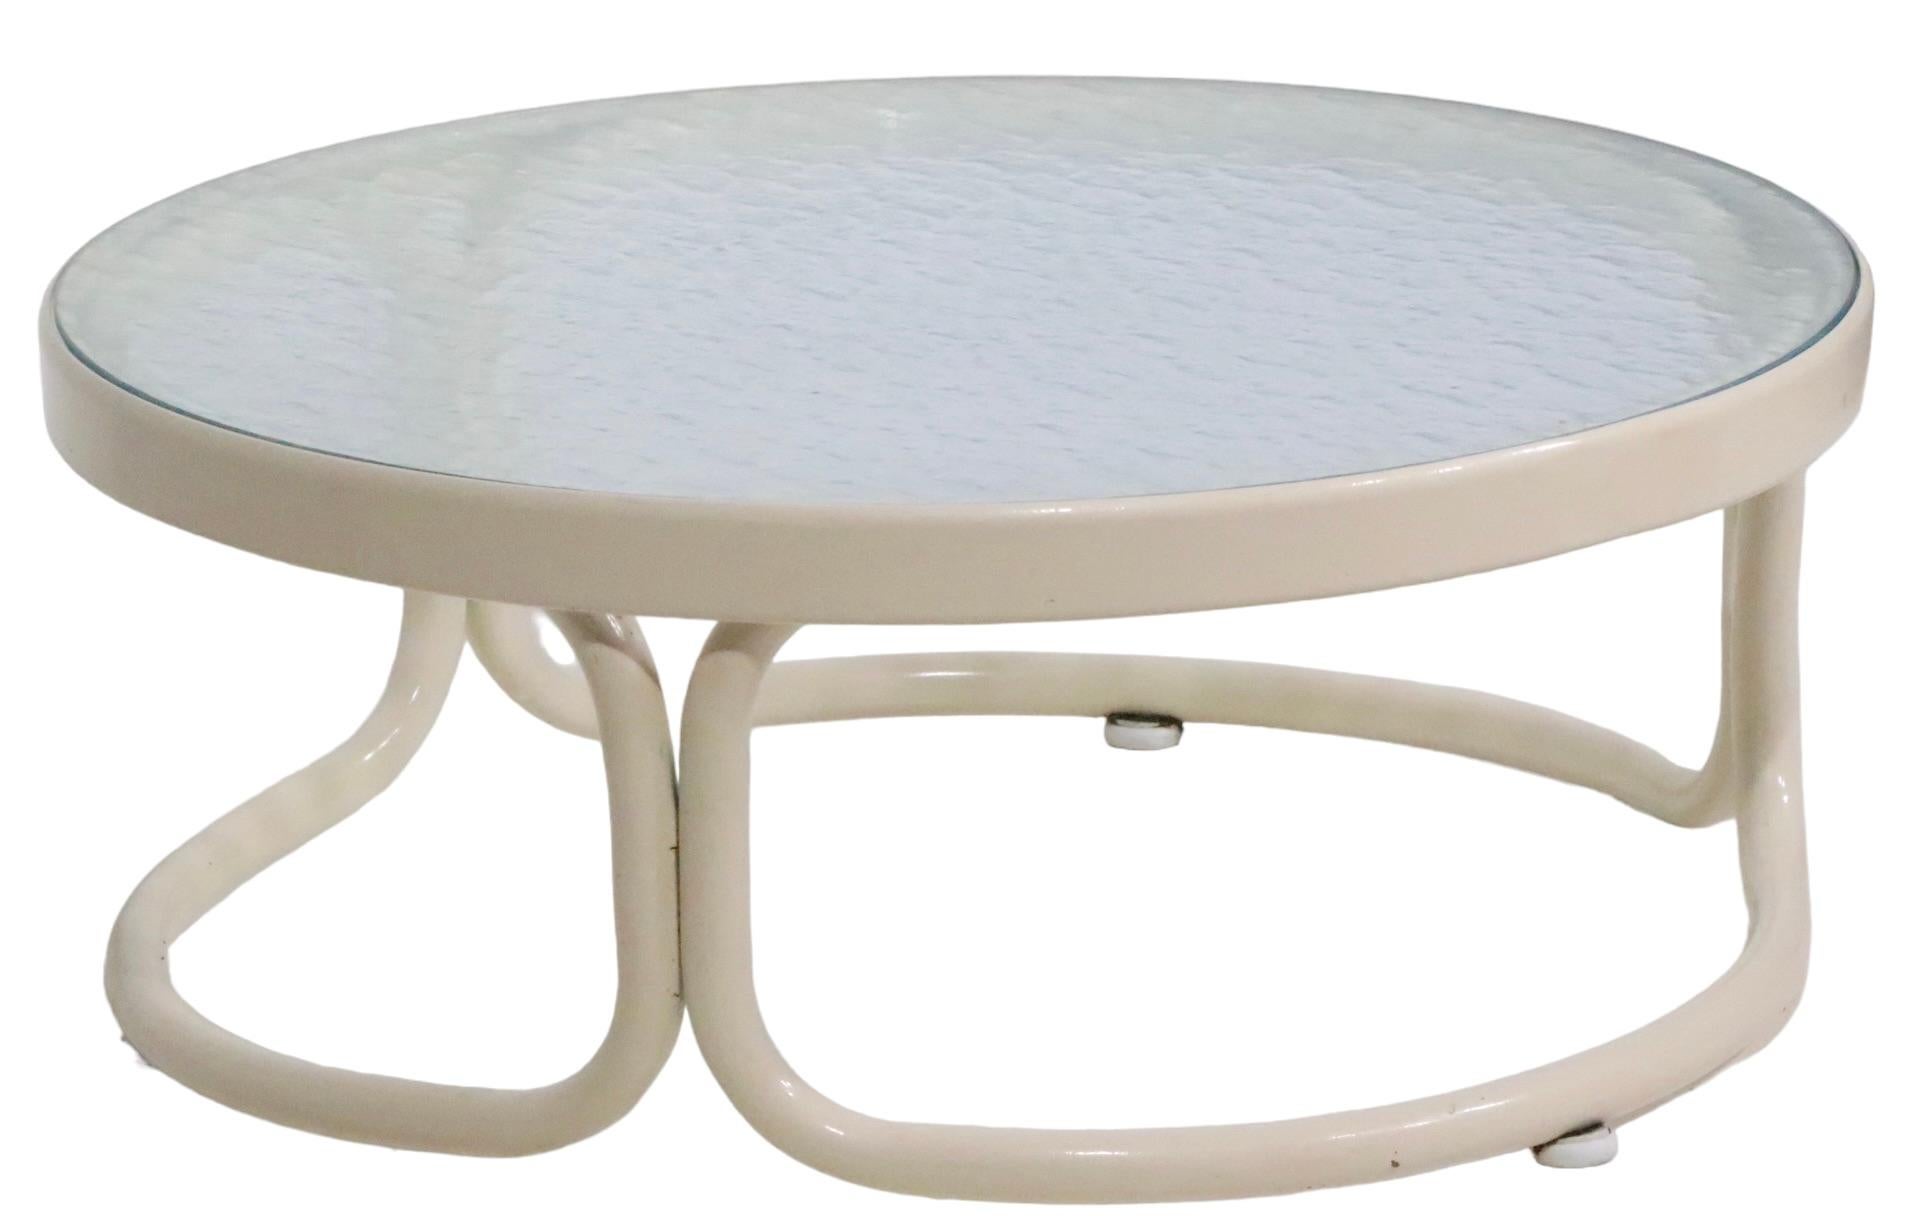 Post-Modern Vintage Poolside Patio Side Table with Aluminum Frame and Textured Glass Top For Sale